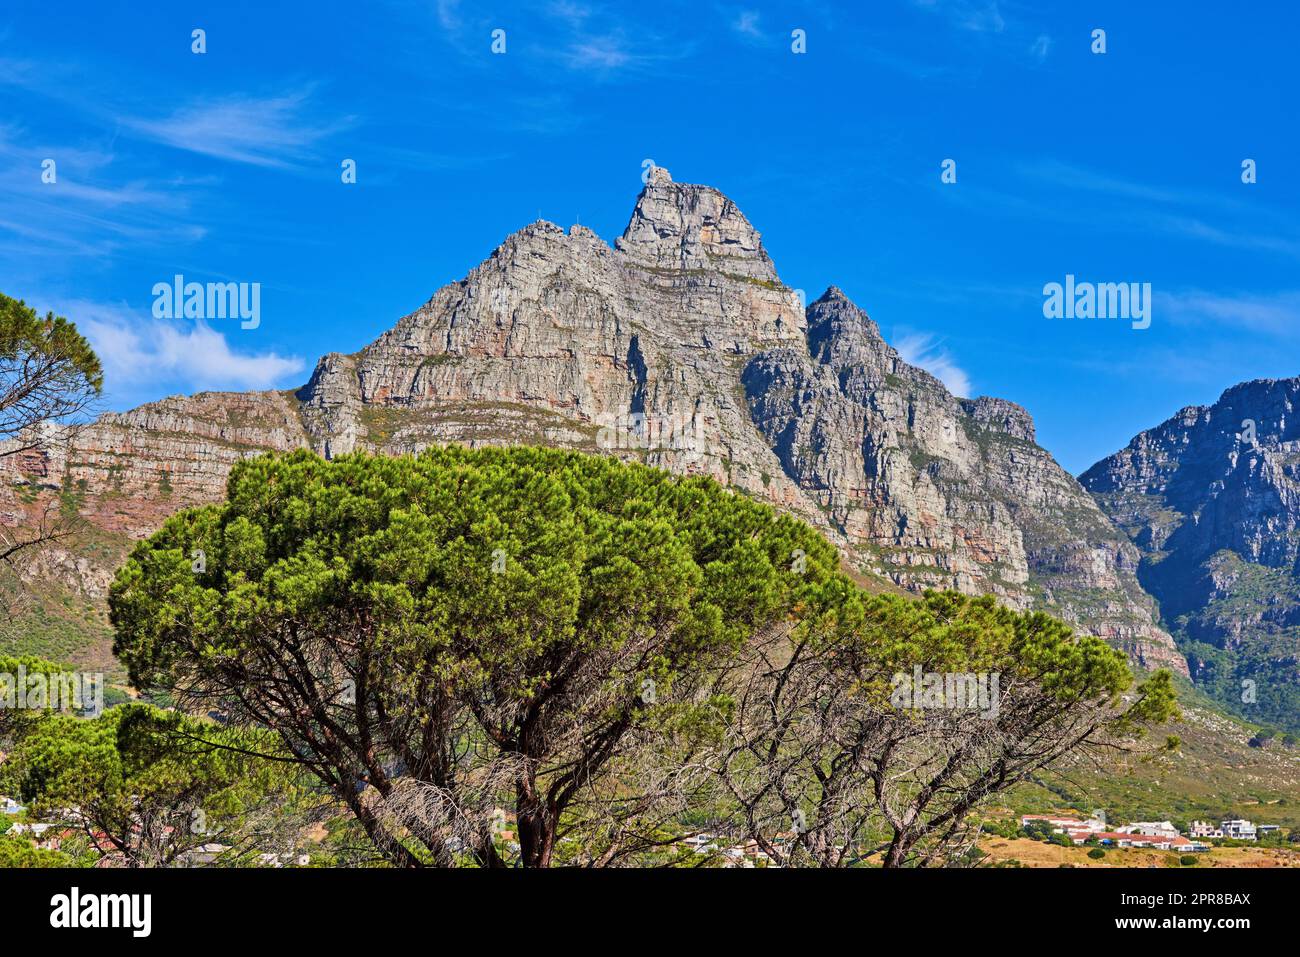 A bottom view picture of Table mountain - South Africa. A beautiful nature view picture of a high mountain shaped like a lions head with green trees and a town next to it. A mountain range is seen. Stock Photo